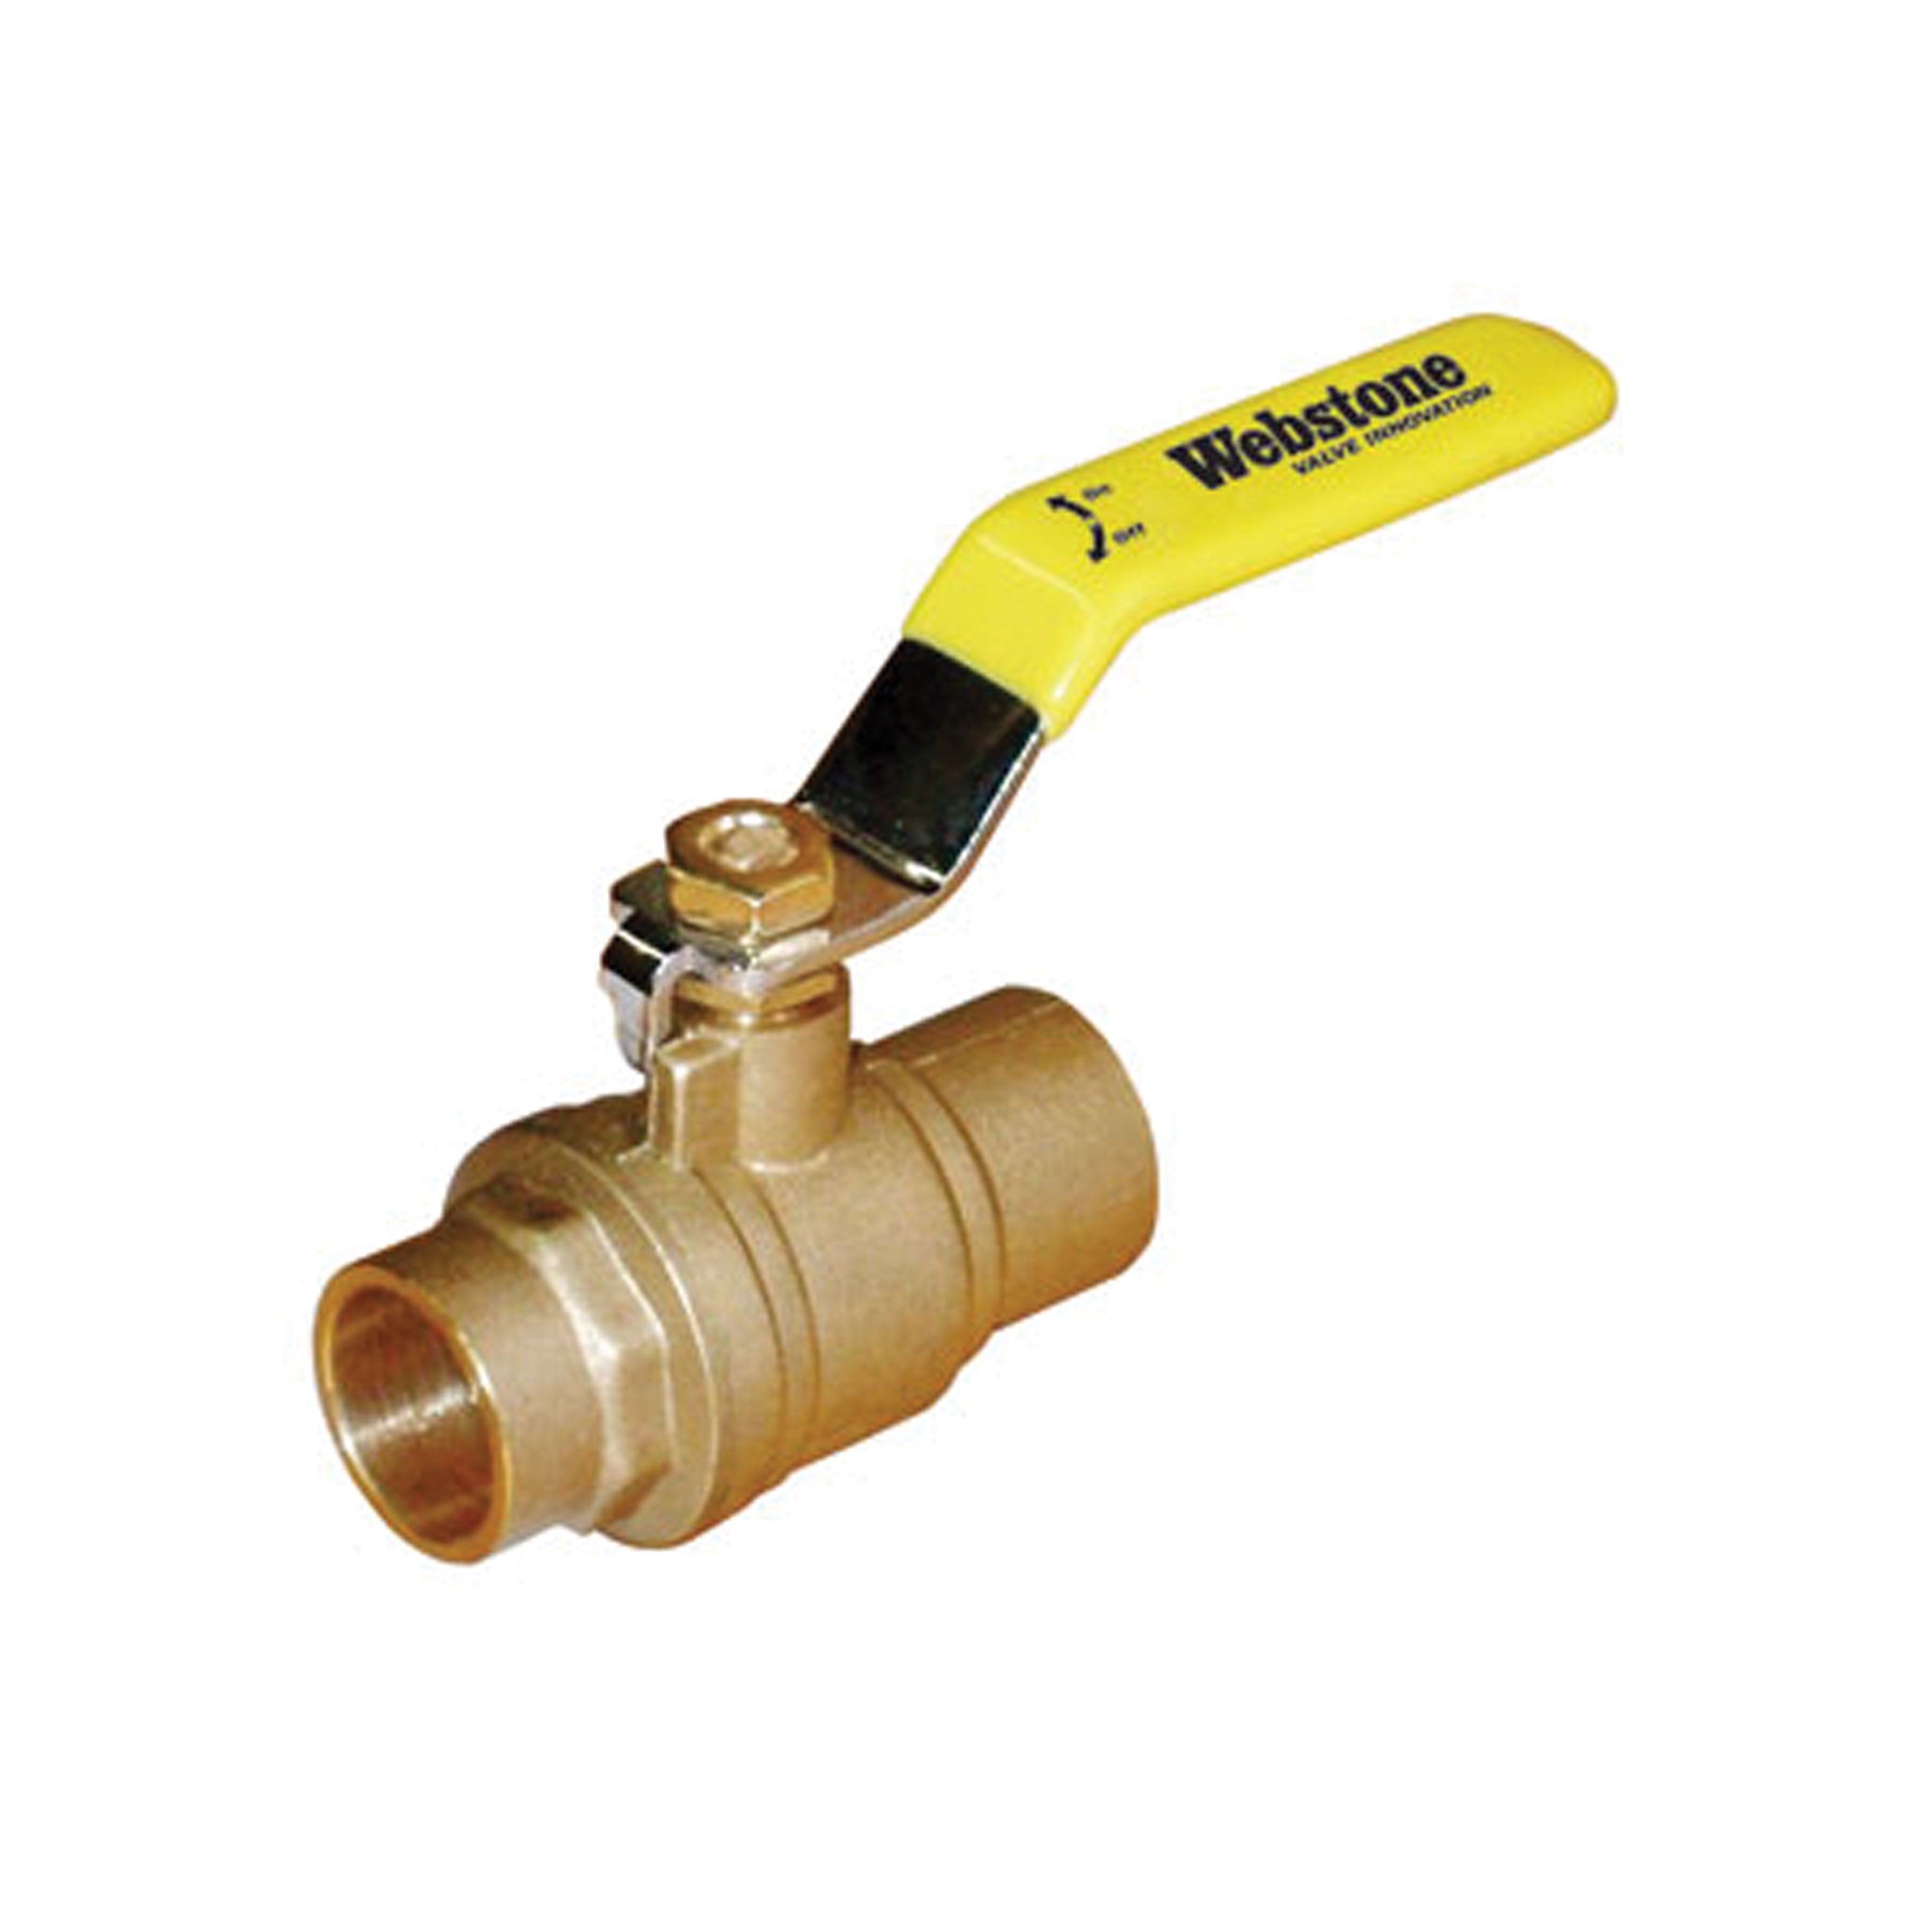 Webstone 51702 Standard Full Port Forged Brass Ball Valve with Chrome Plated Lever Handle - 1/2" Sweat H-51702